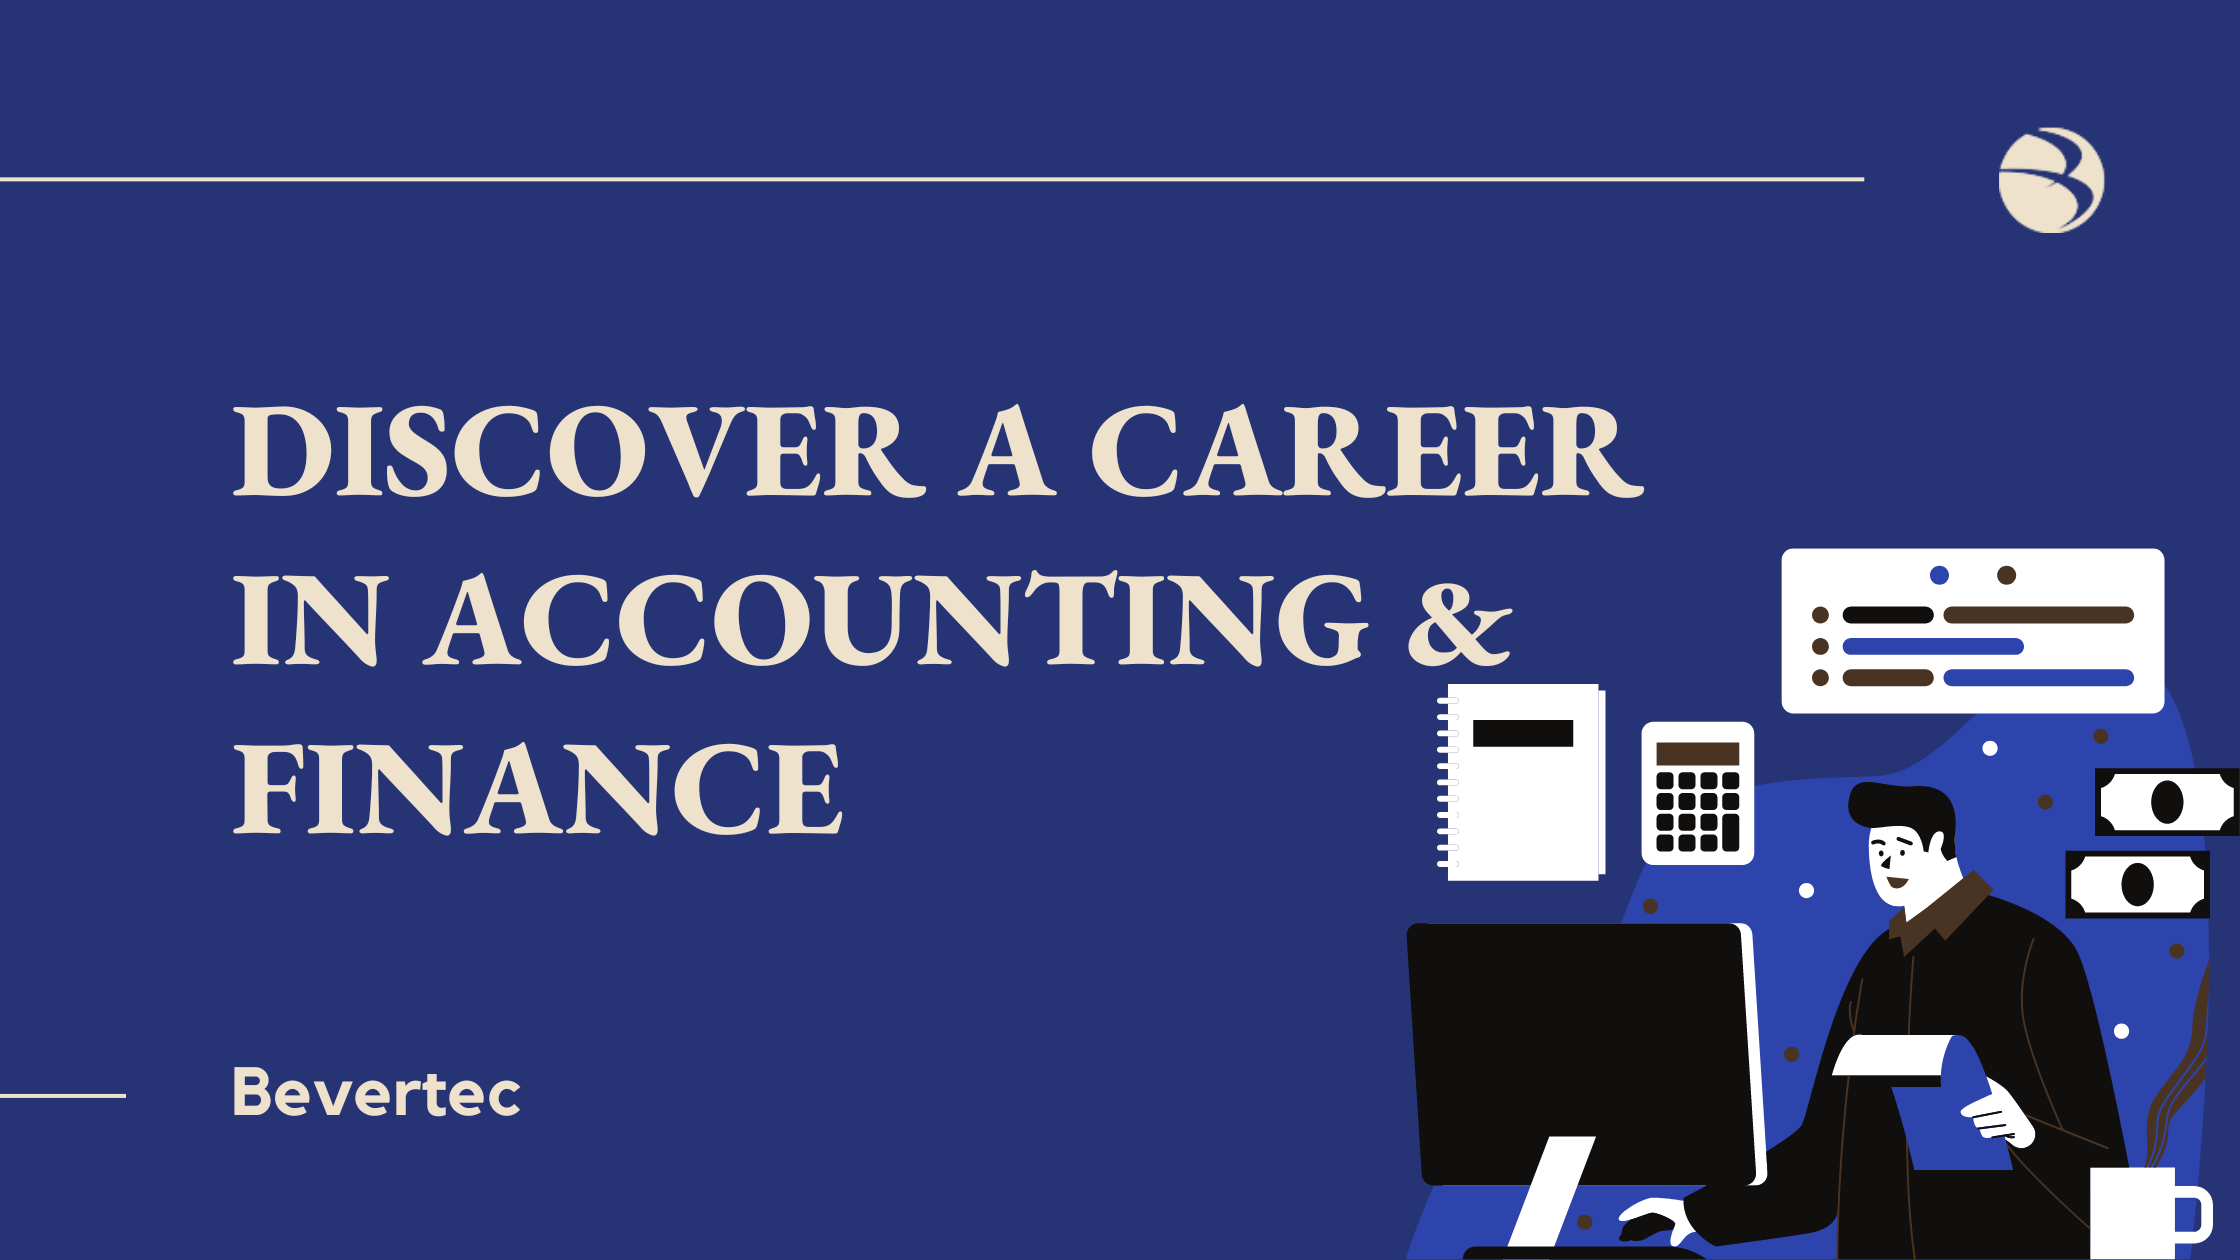 DISCOVER A CAREER IN ACCOUNTING & FINANCE